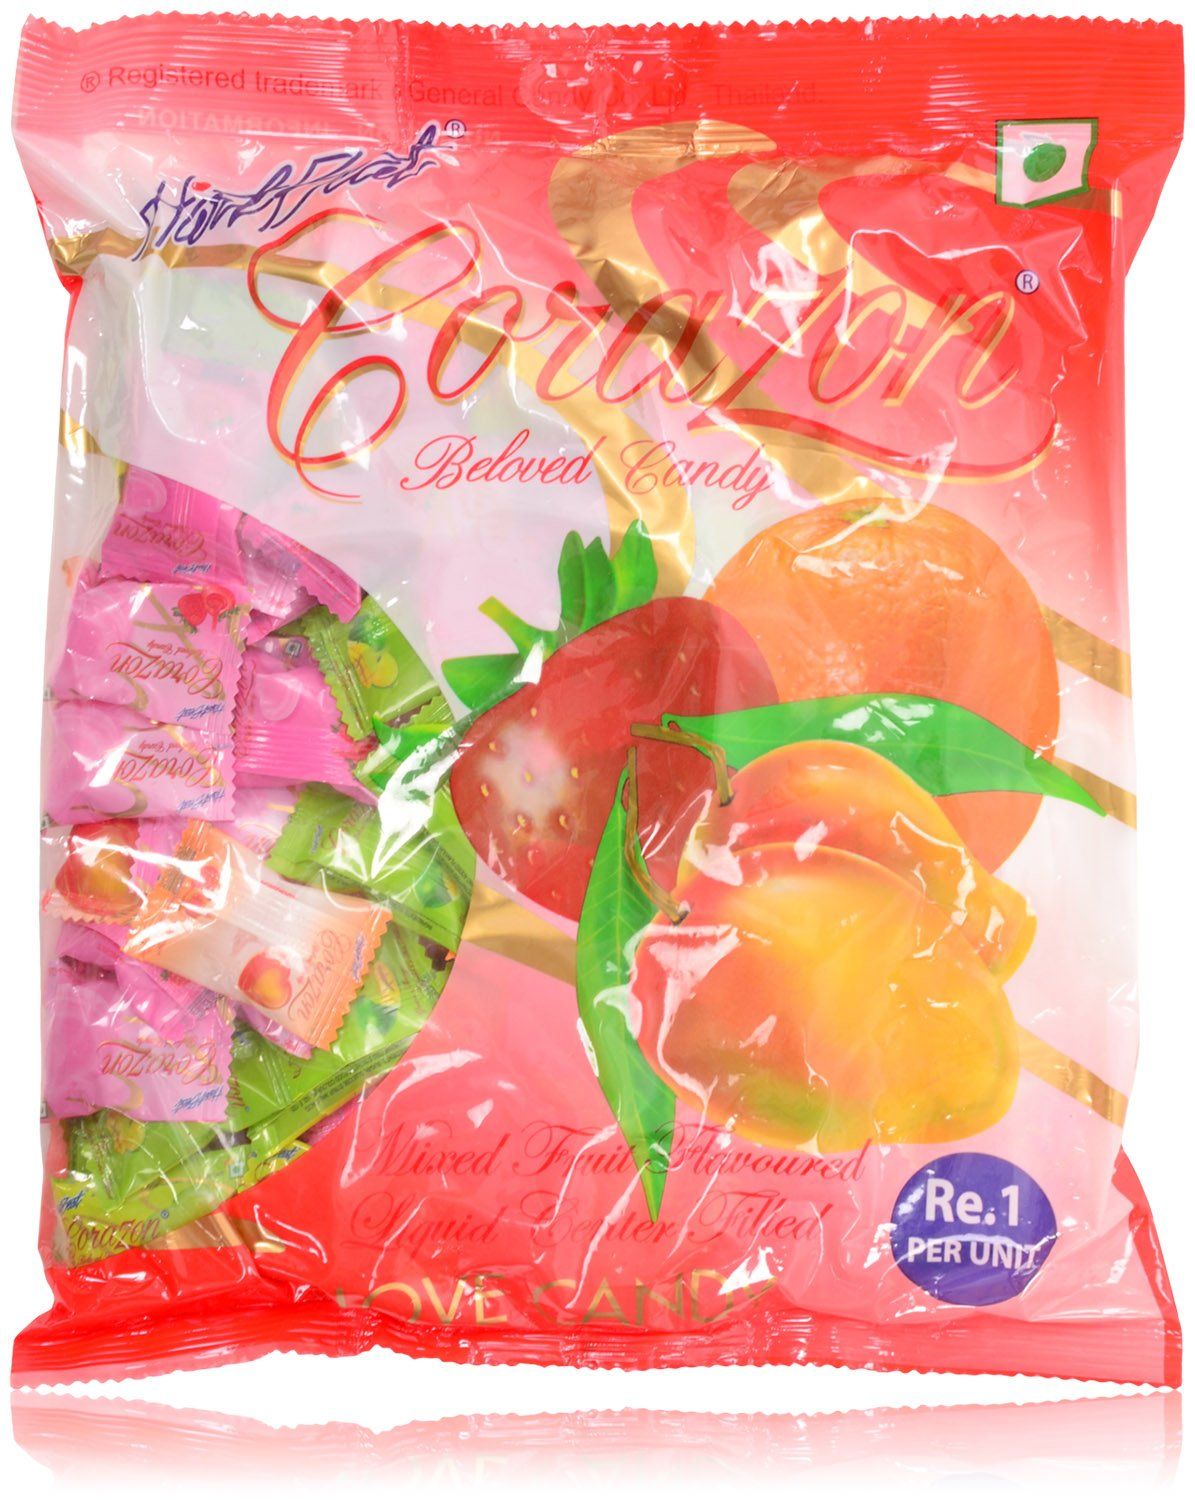 Hartbeat Corazon Beloved Candy Mixed Fruit Flavoured Image